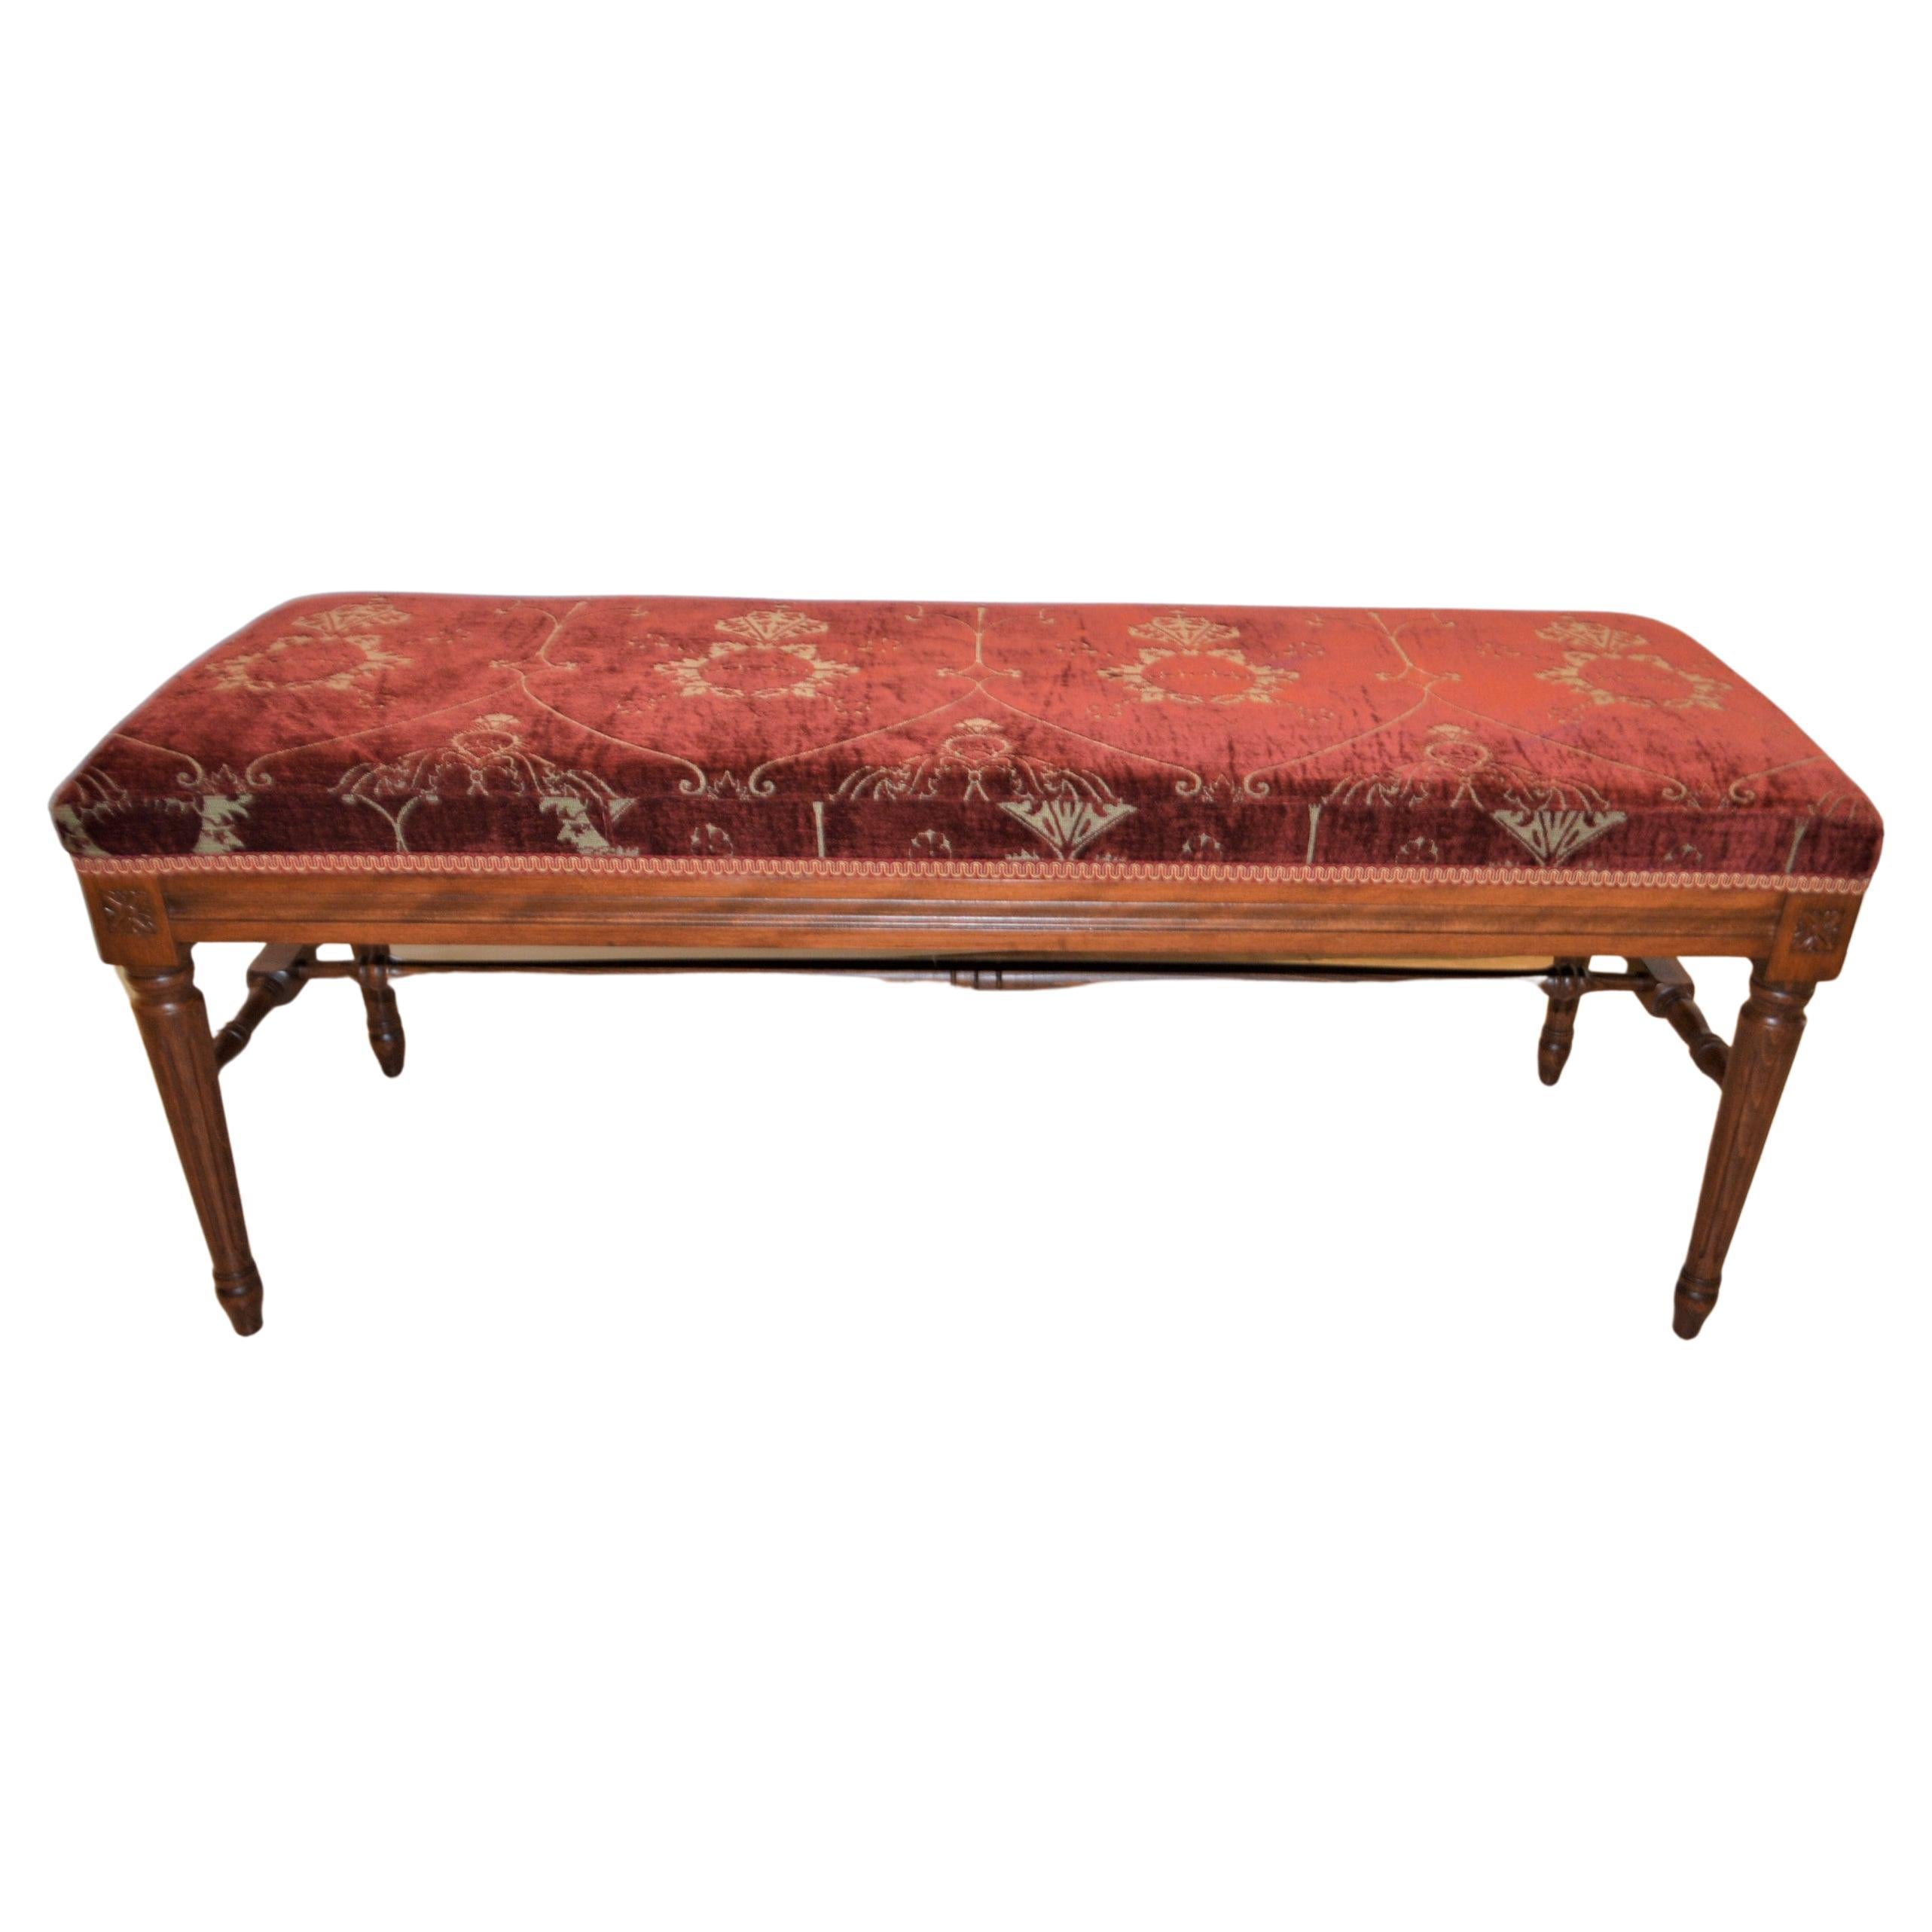 Louis XVI style bench upholstered with a red antique chenille fabric.